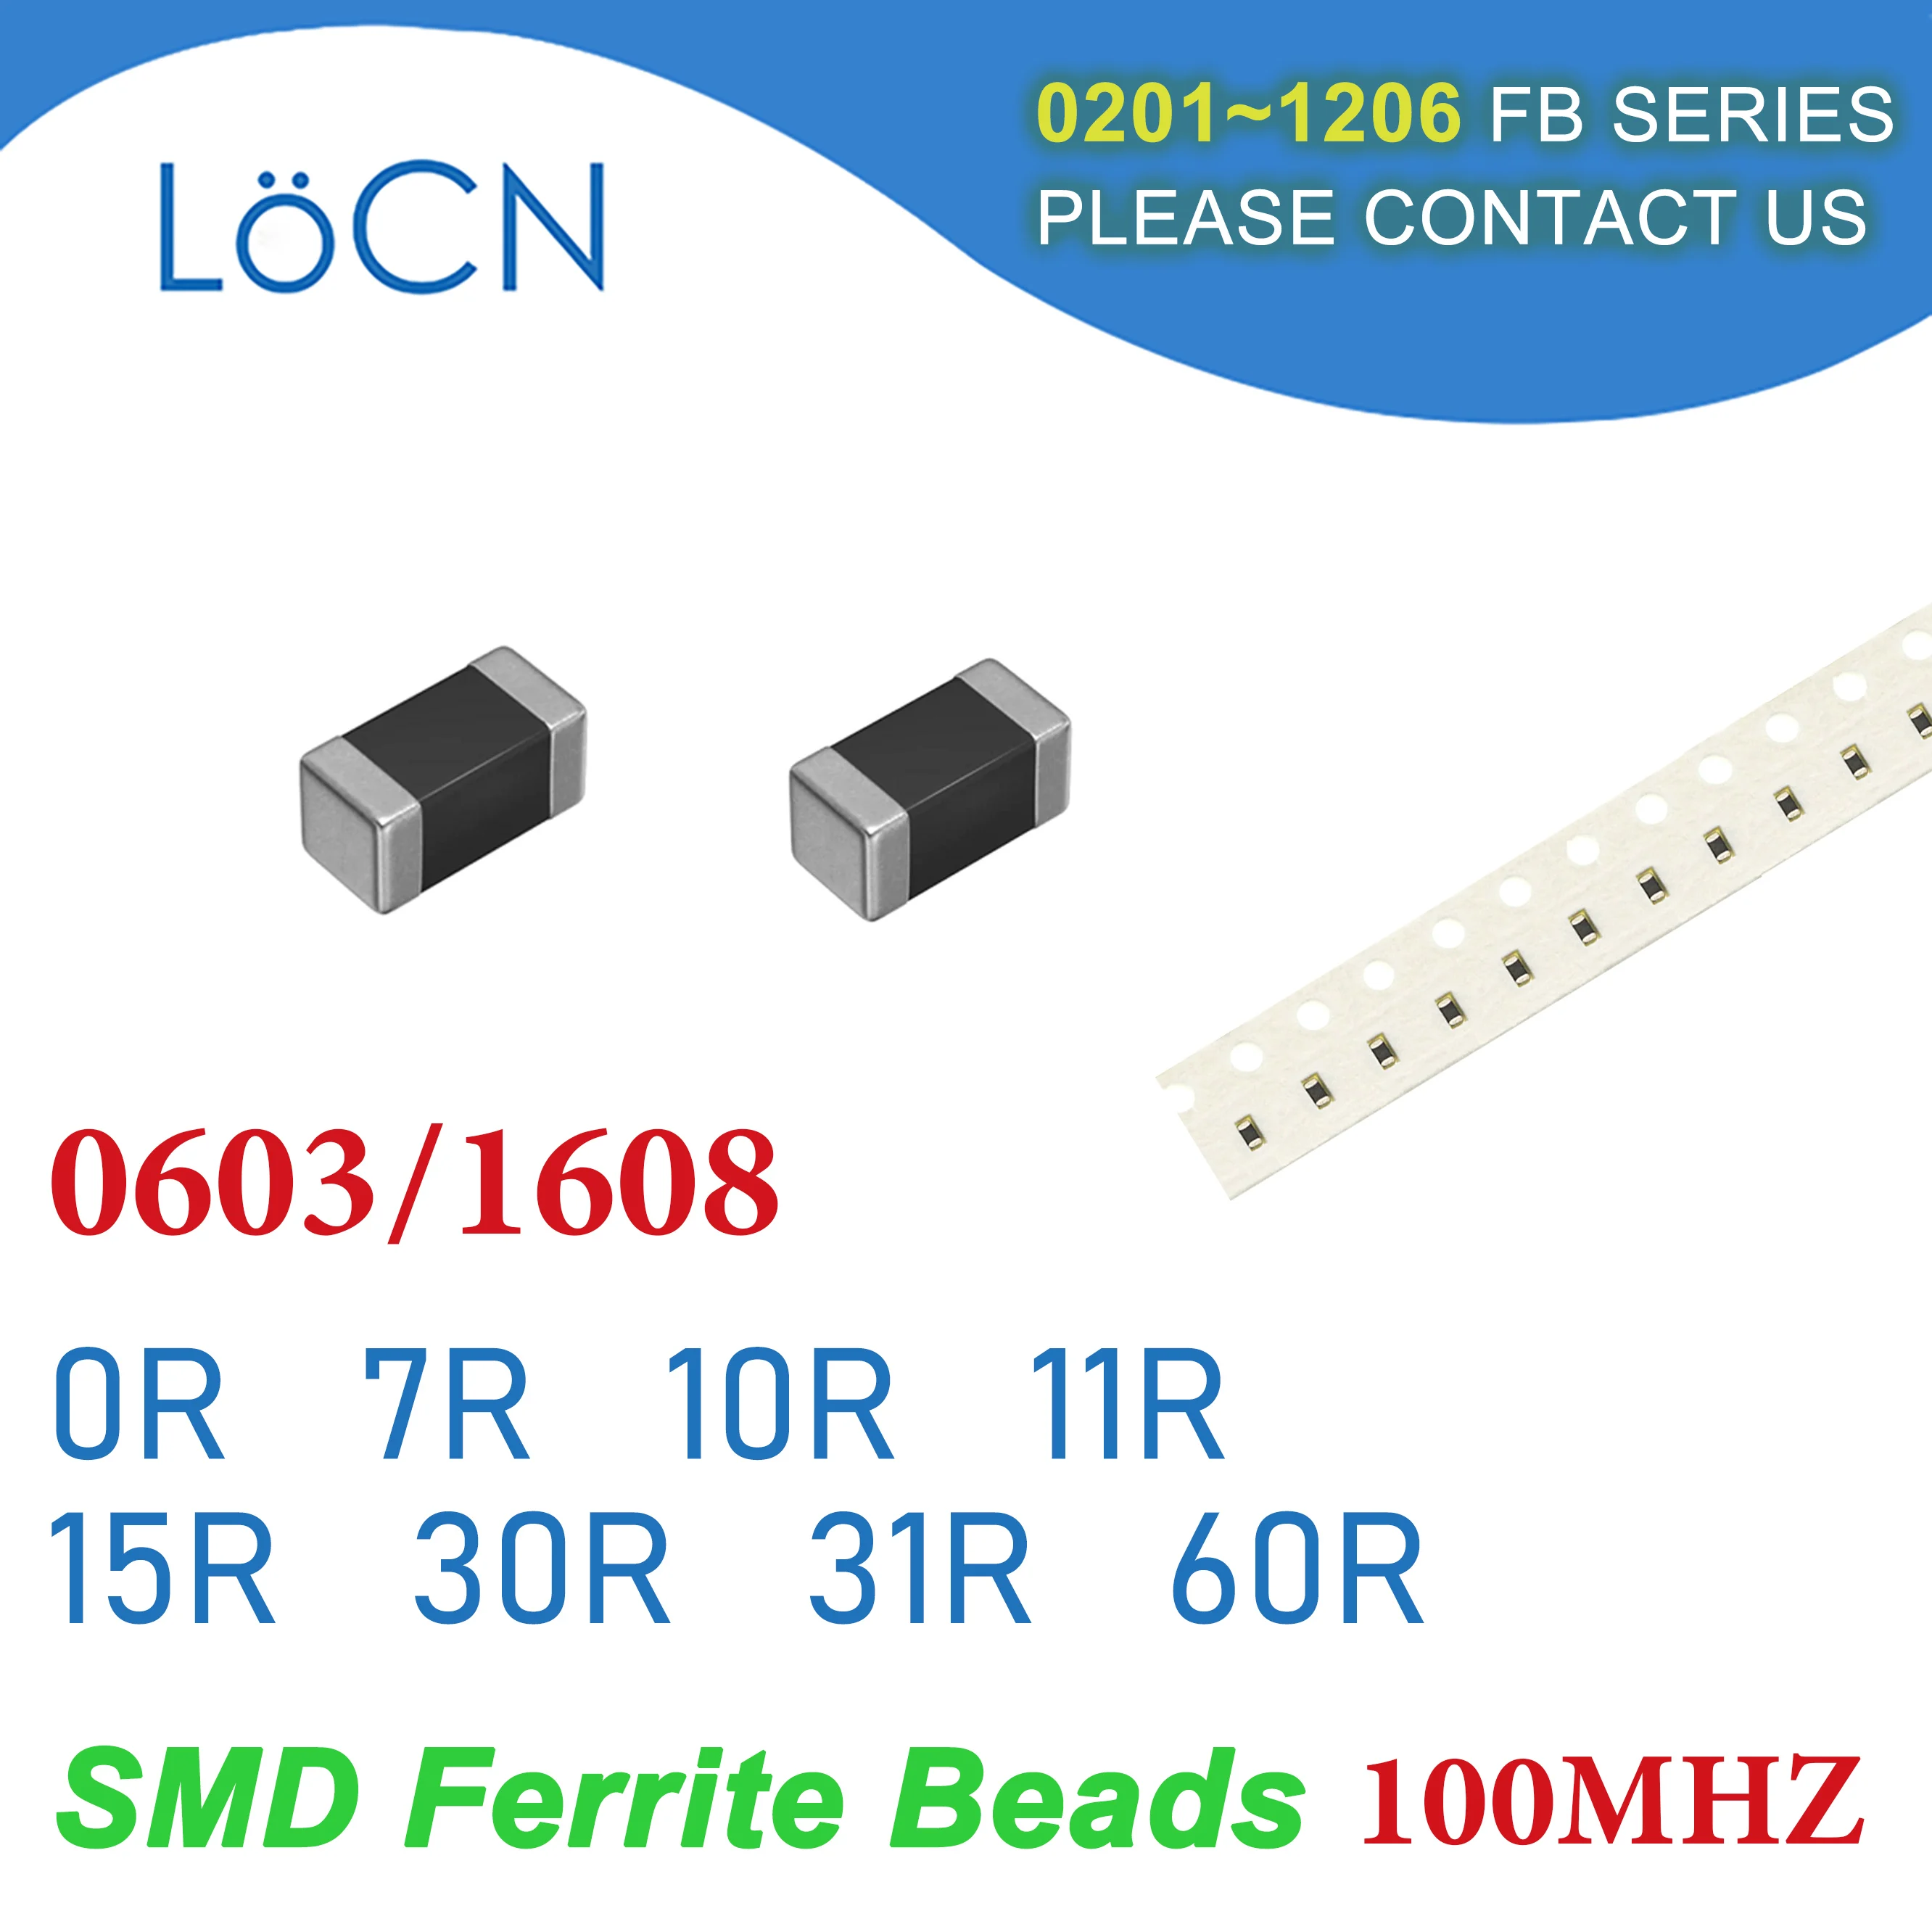 

4000PCS 0603/1608 100MHZ SMD Ferrite Beads 0R 7R 10R 19R 26R 30R 31R 36R Chip Inductor Multilayer 25% High Quality